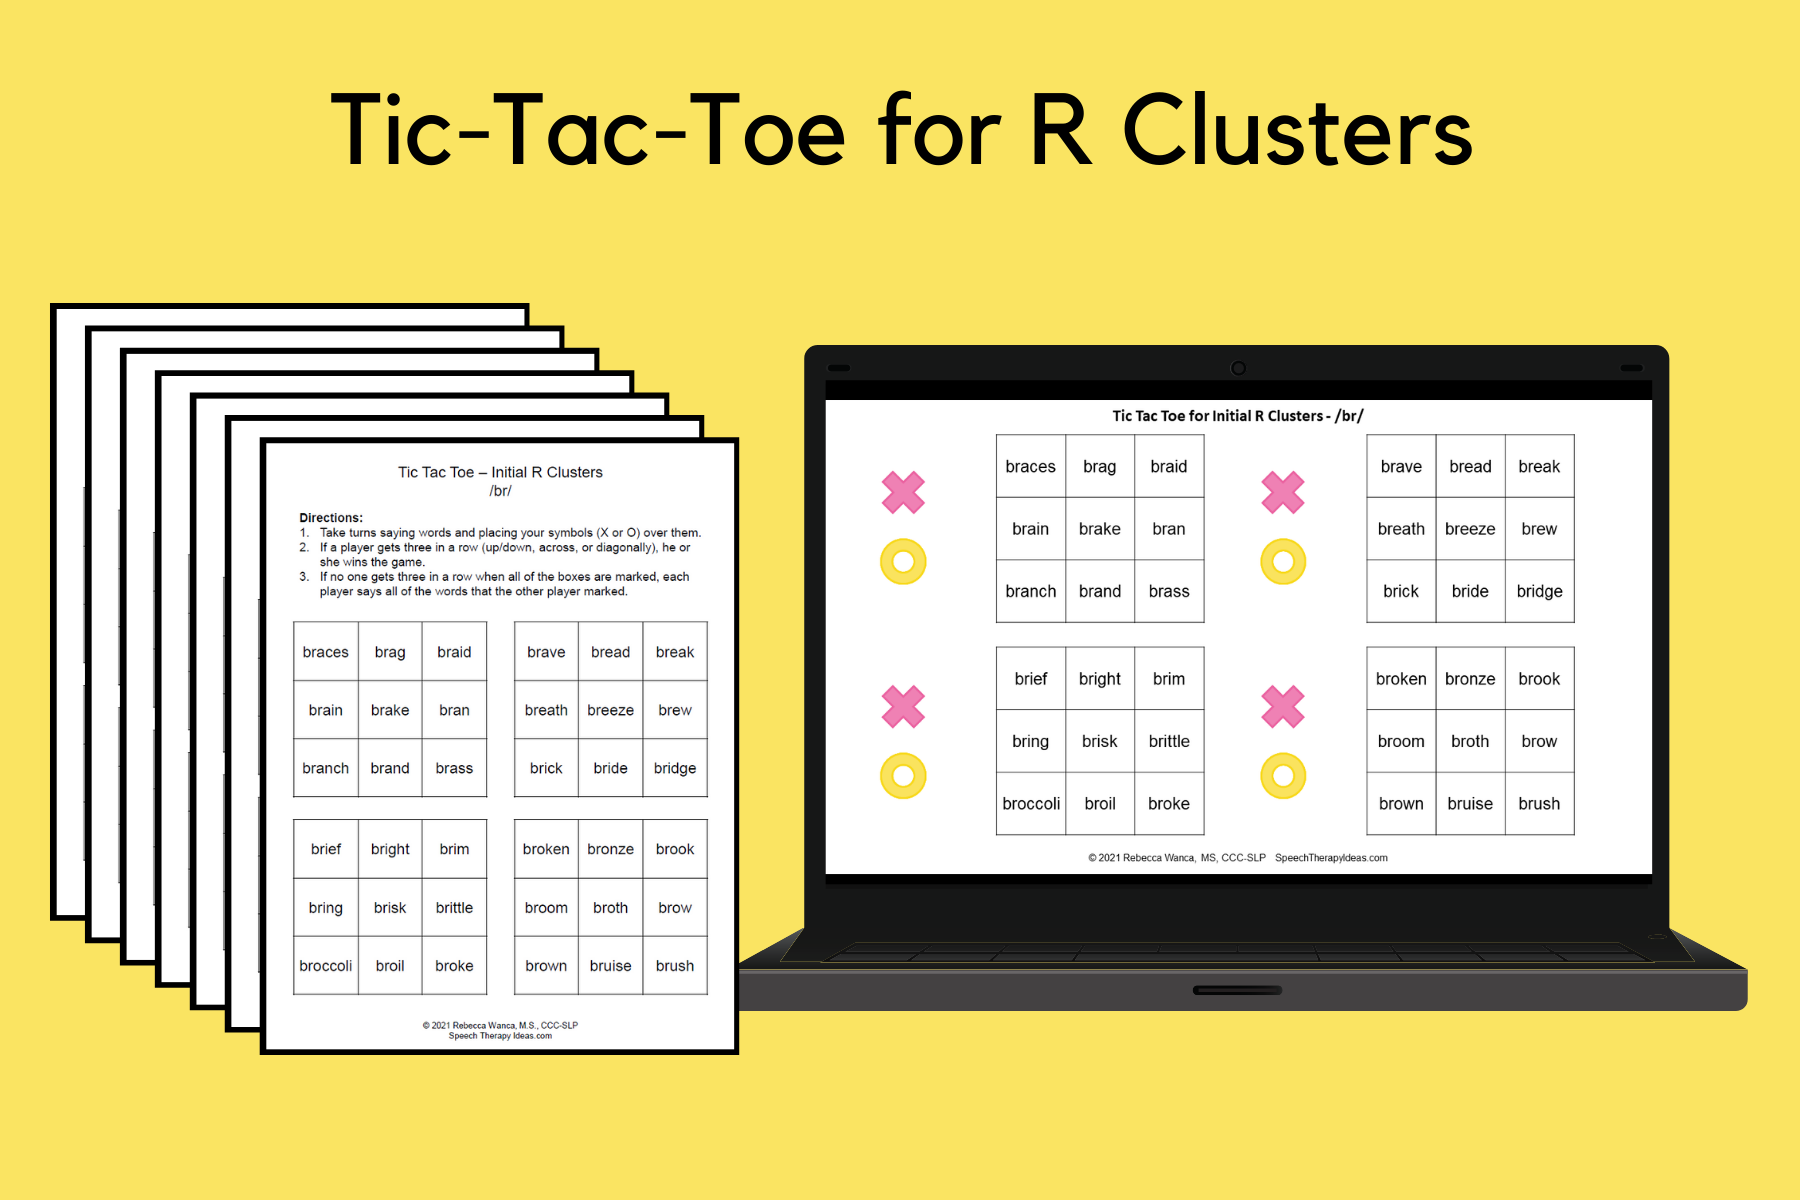 Tic-Tac-Toe Games for Initial R Clusters